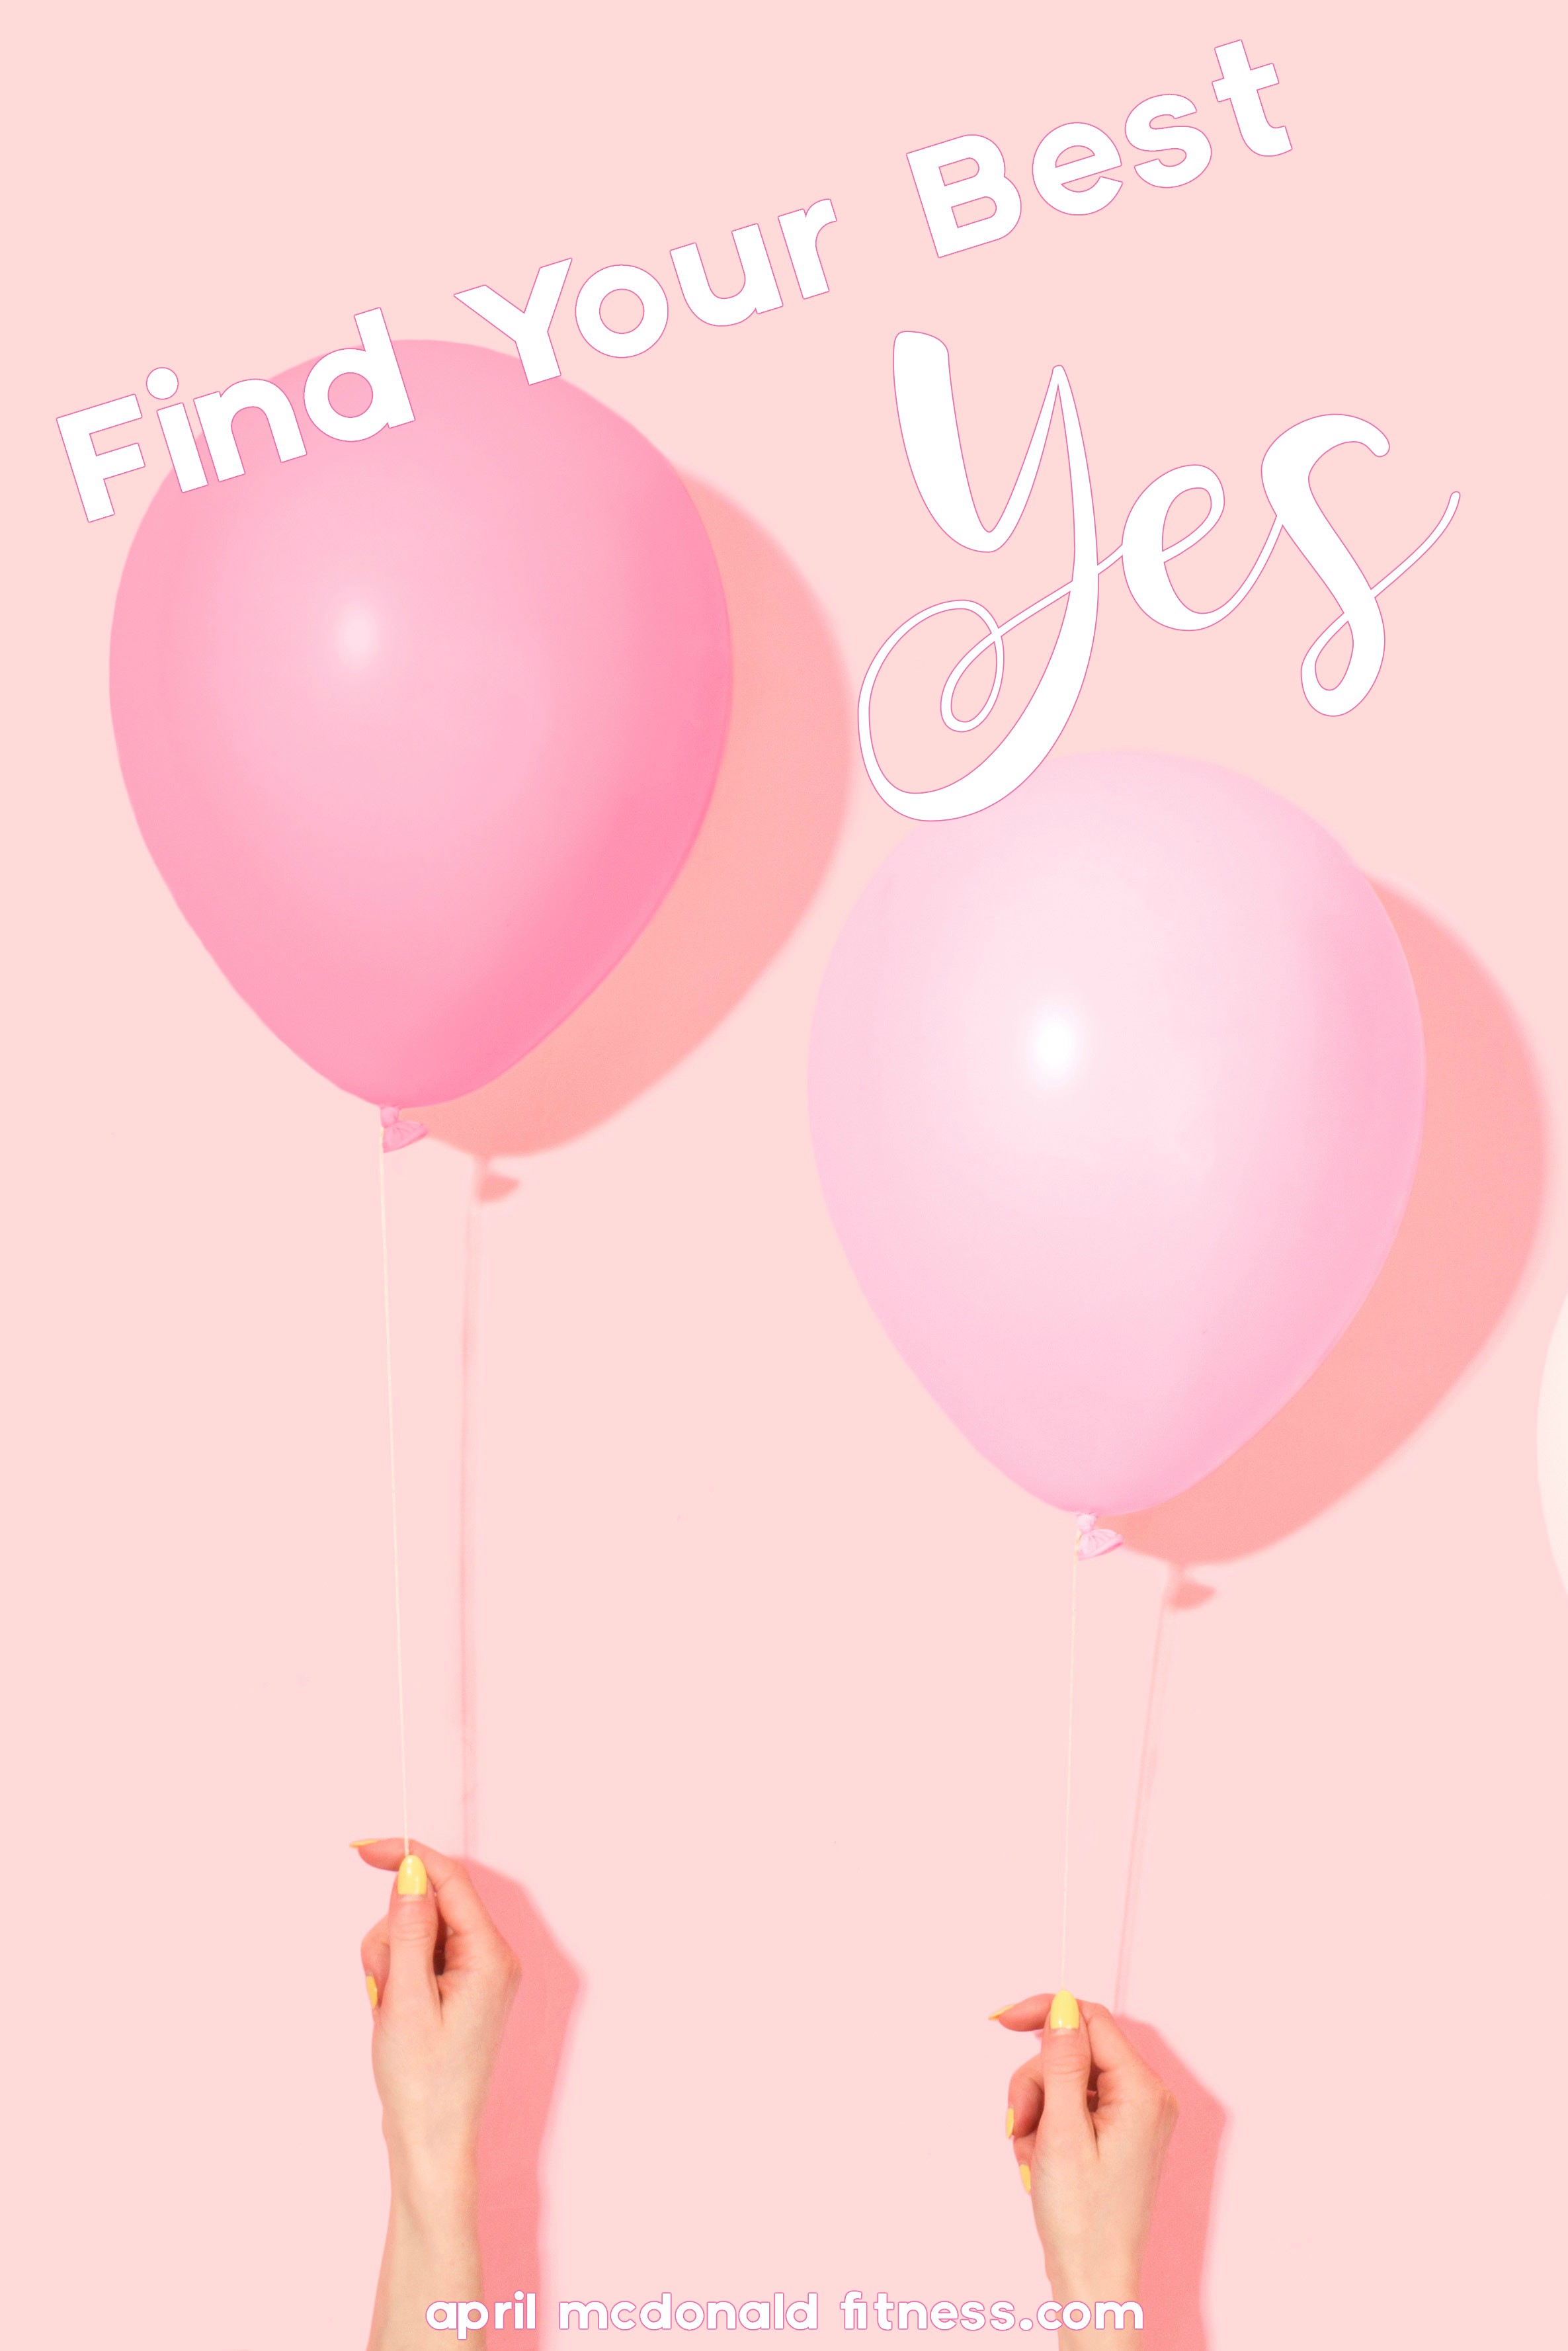 Find your best yes